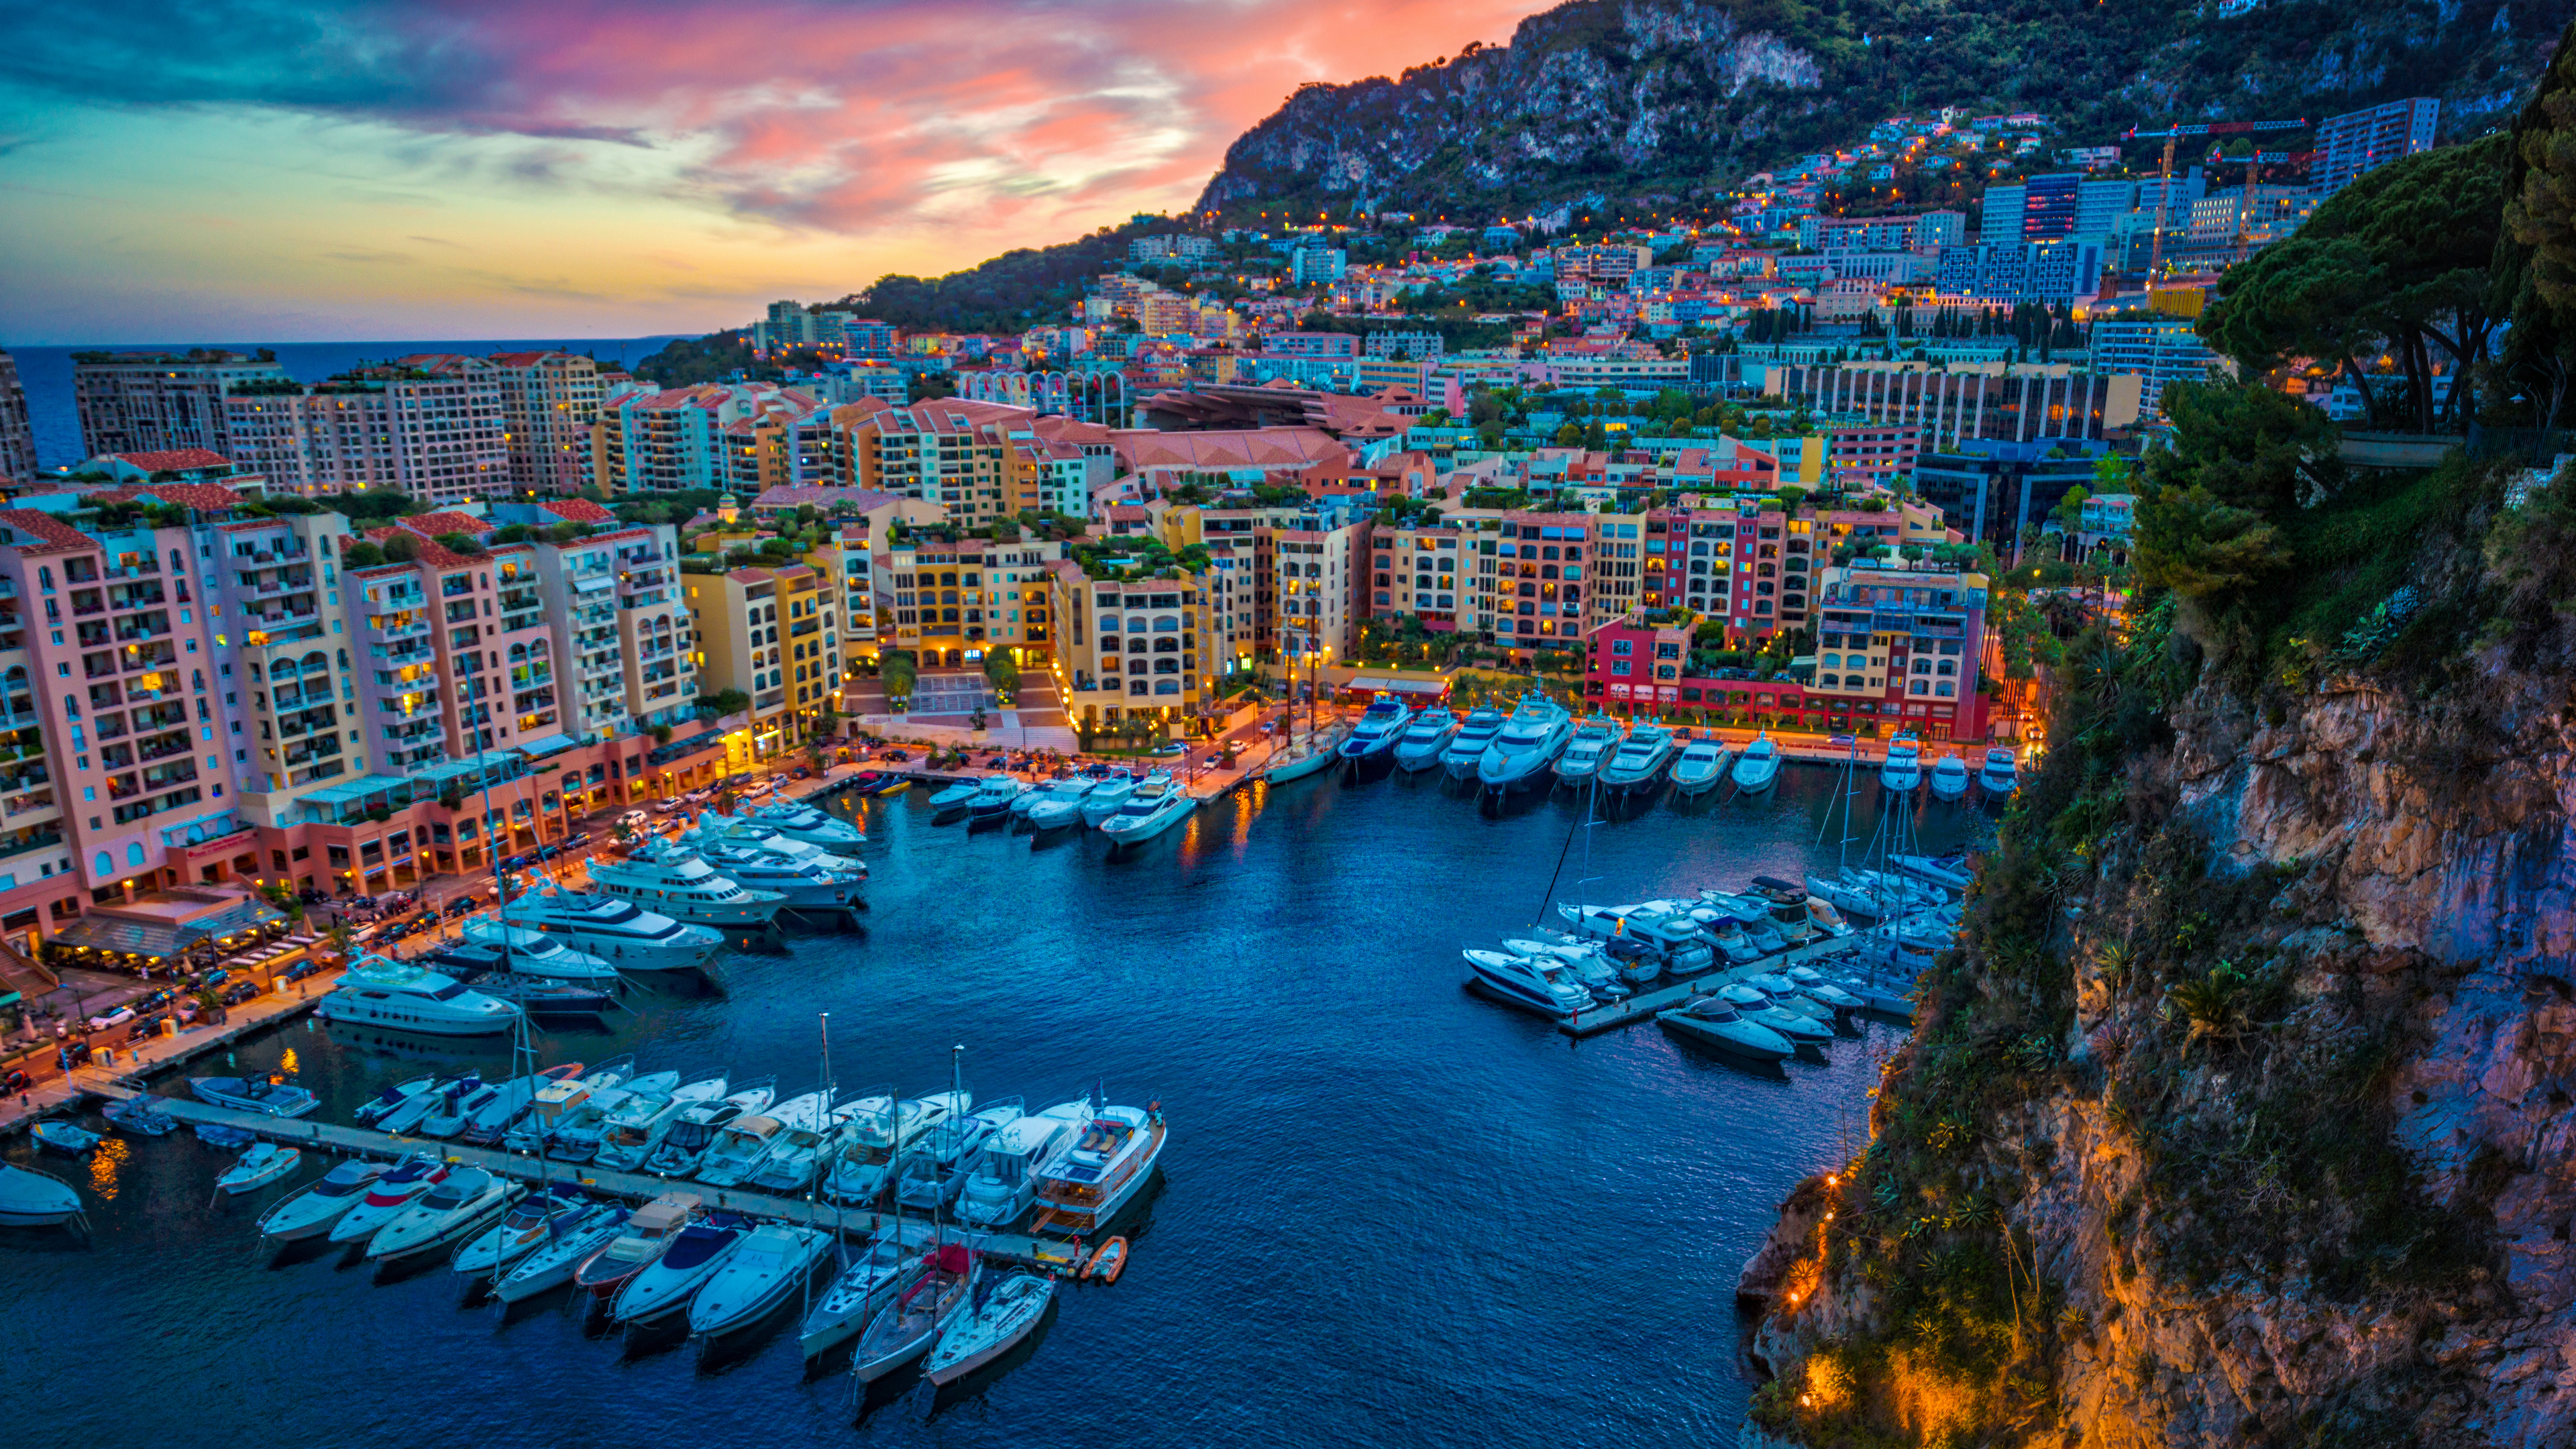 Trey Ratcliff Photography Cityscape Monaco Building Water Yacht Hills Mountains Trees Sky Clouds Bay 3840x2160